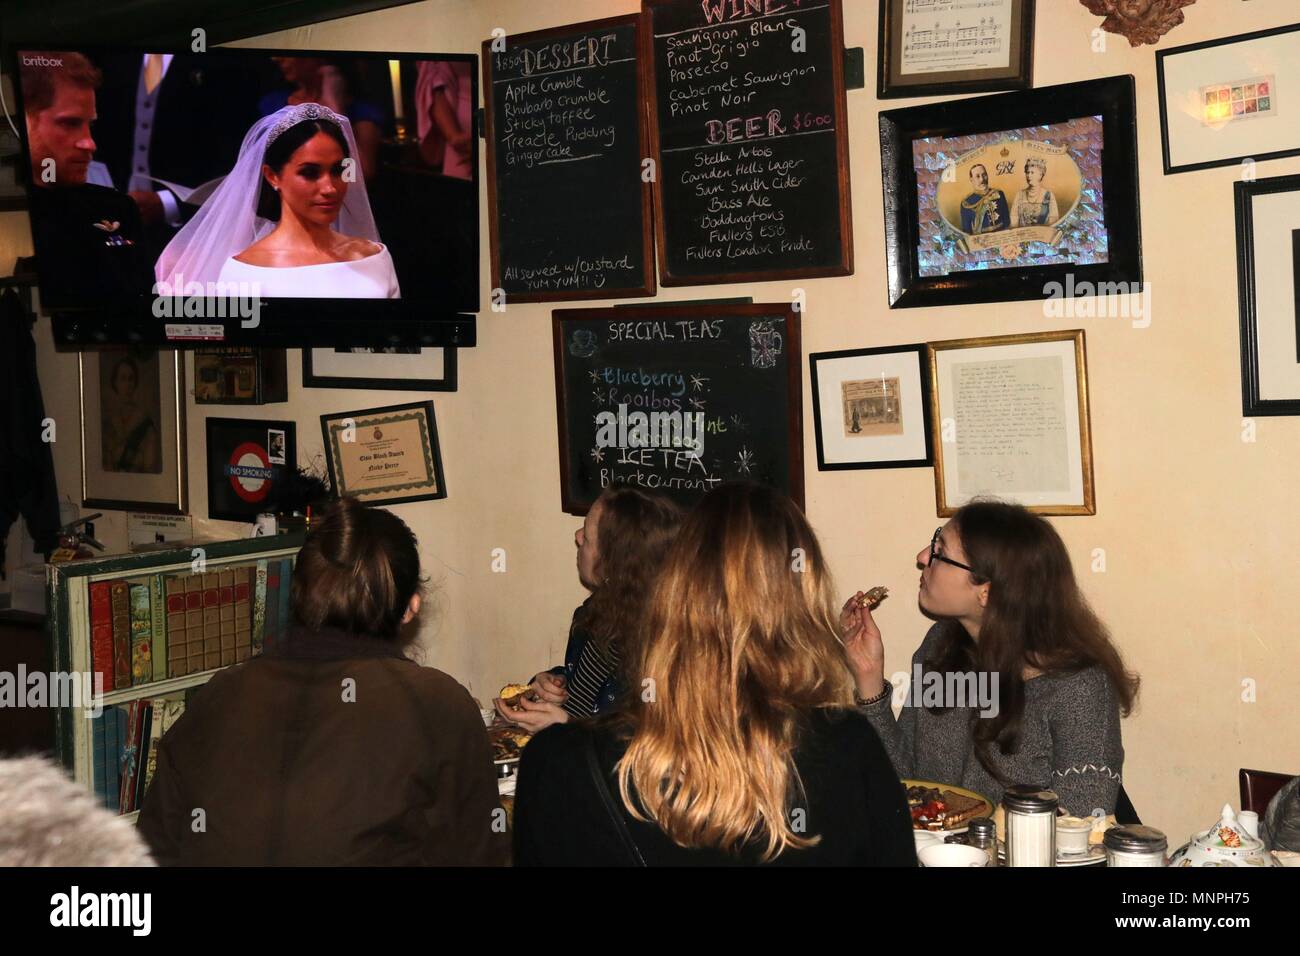 New York City, New York, USA. 19th May, 2018. British expatriates packed Tea & Sympathy a British restaurant in New York's Greenwich Village to view the Royal Wedding of HRH Prince Harry, The Duke of Sussex to American actress Meghan Markle, now the Duchess of Sussex on May 19, 2018. Credit: G. Ronald Lopez/ZUMA Wire/Alamy Live News Stock Photo